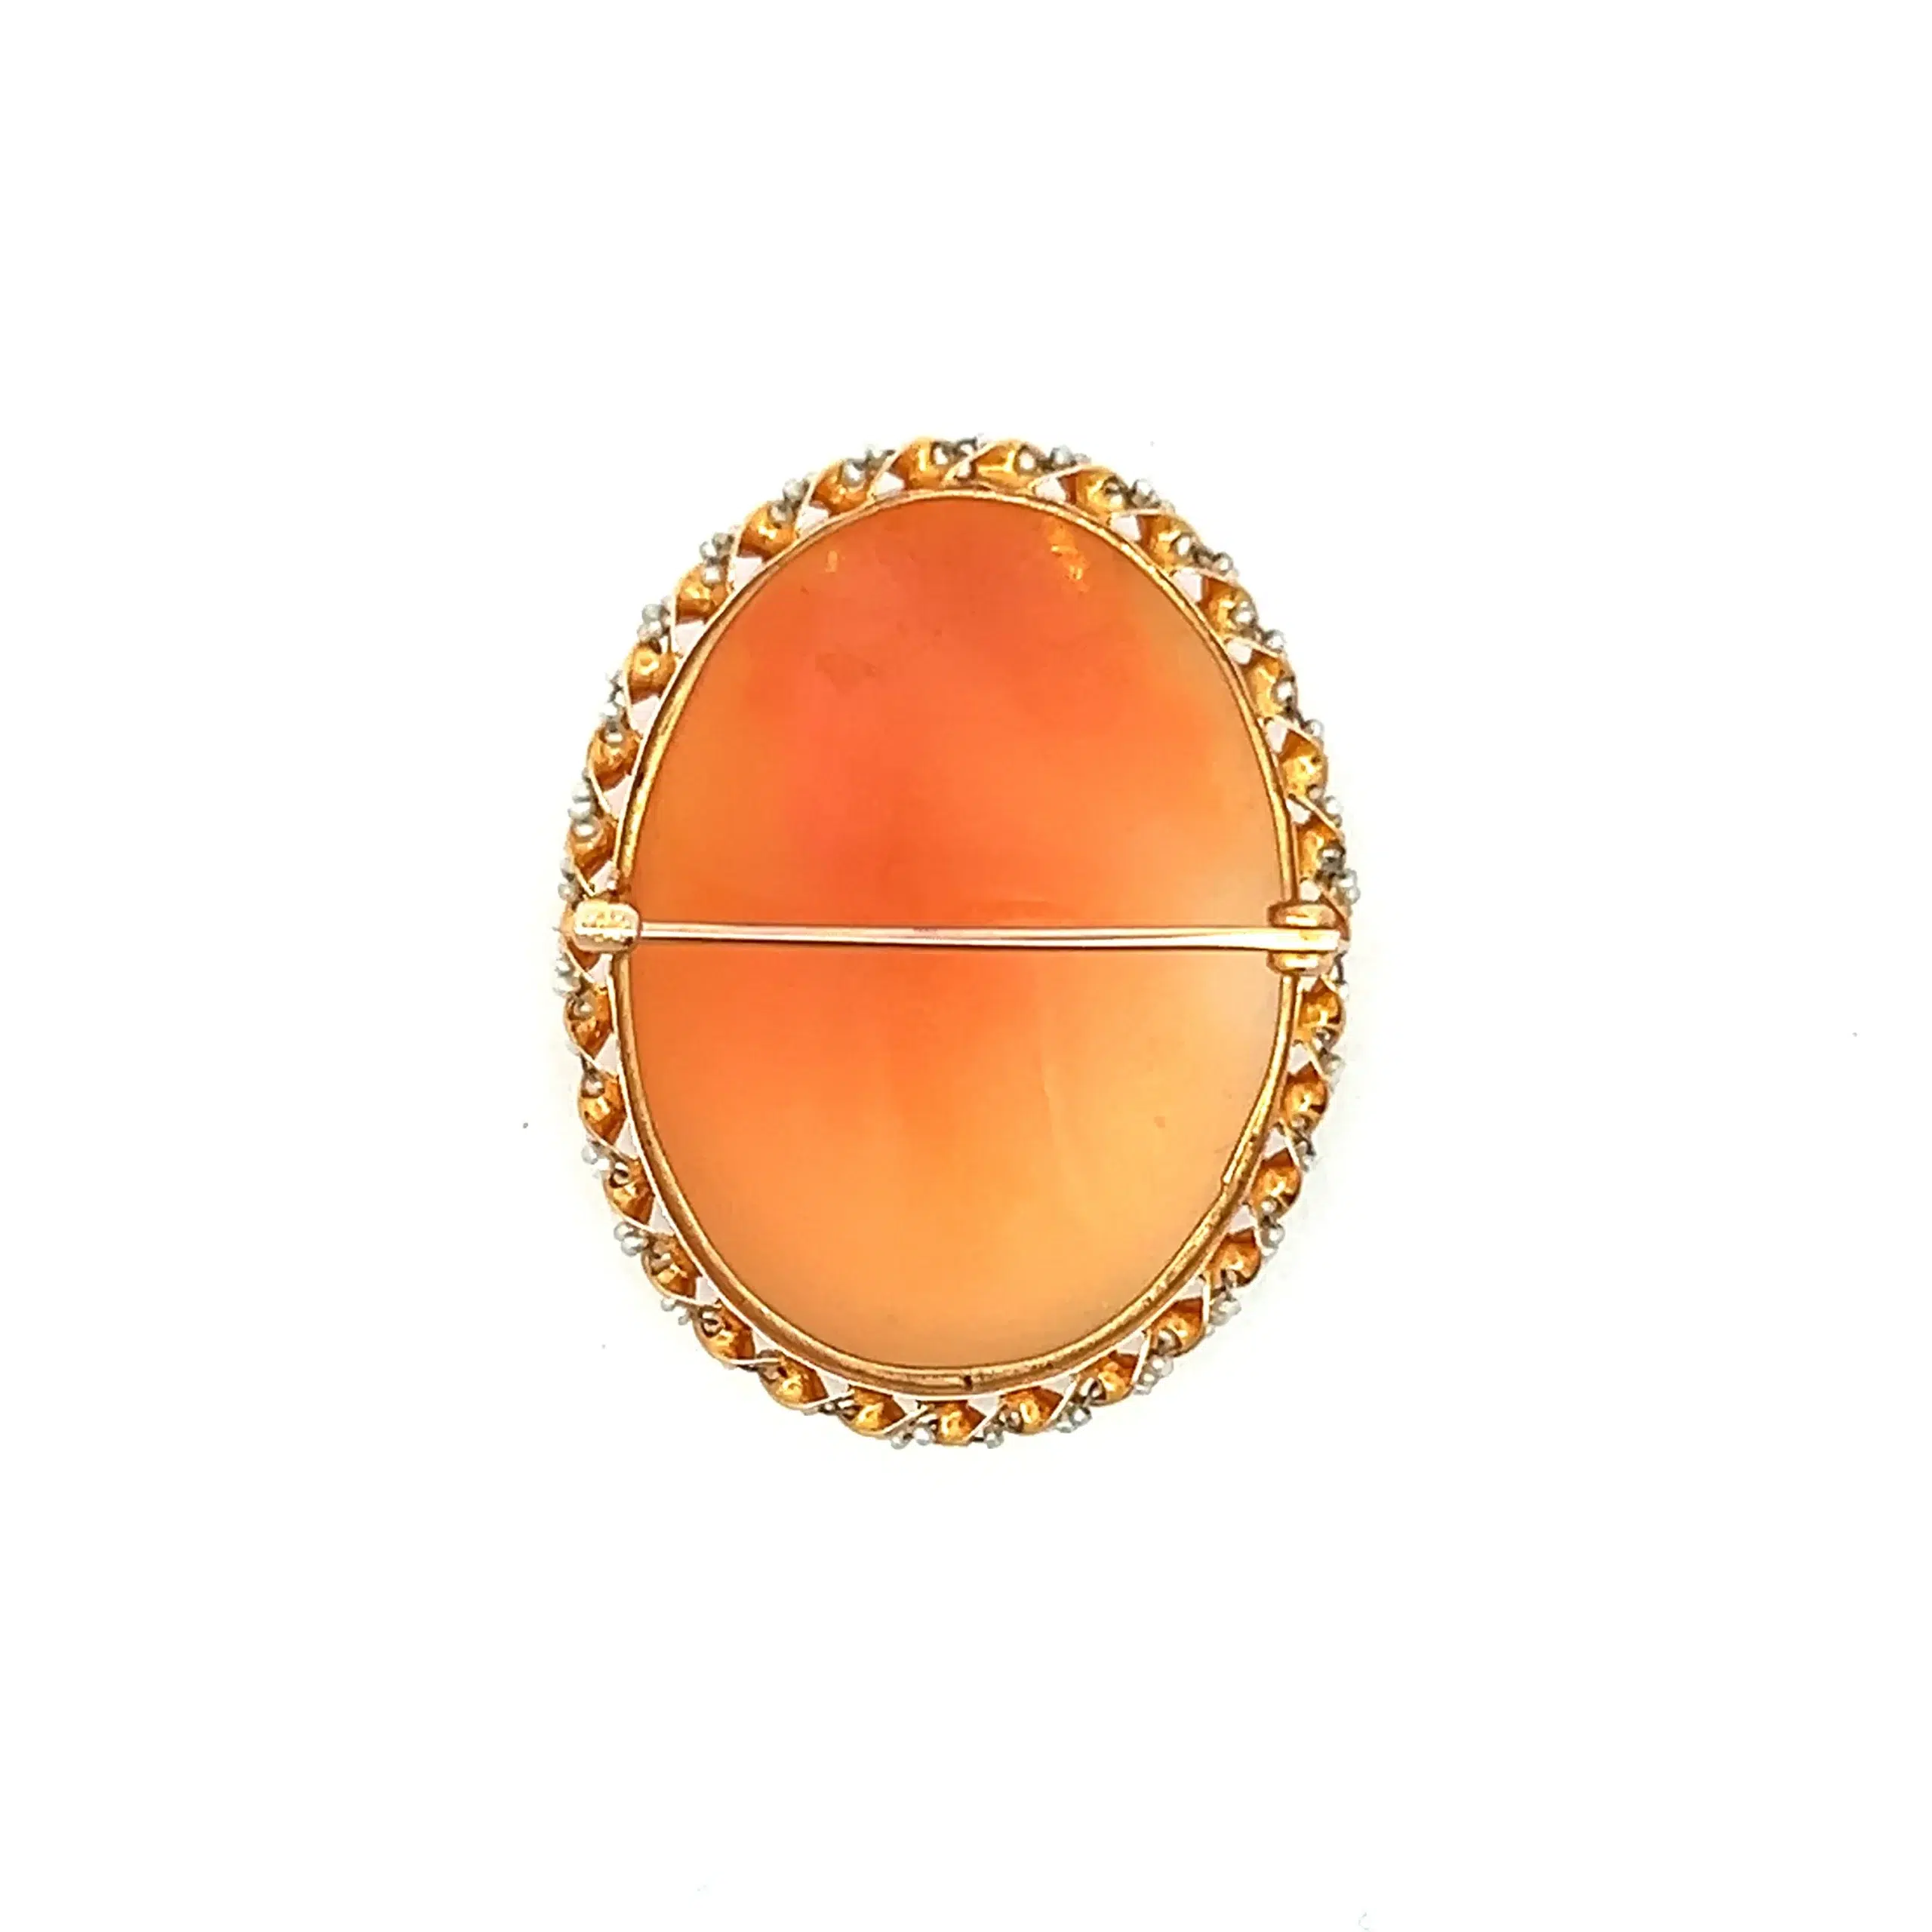 One estate antique 10 karat yellow gold cameo brooch with a seed pearl halo.